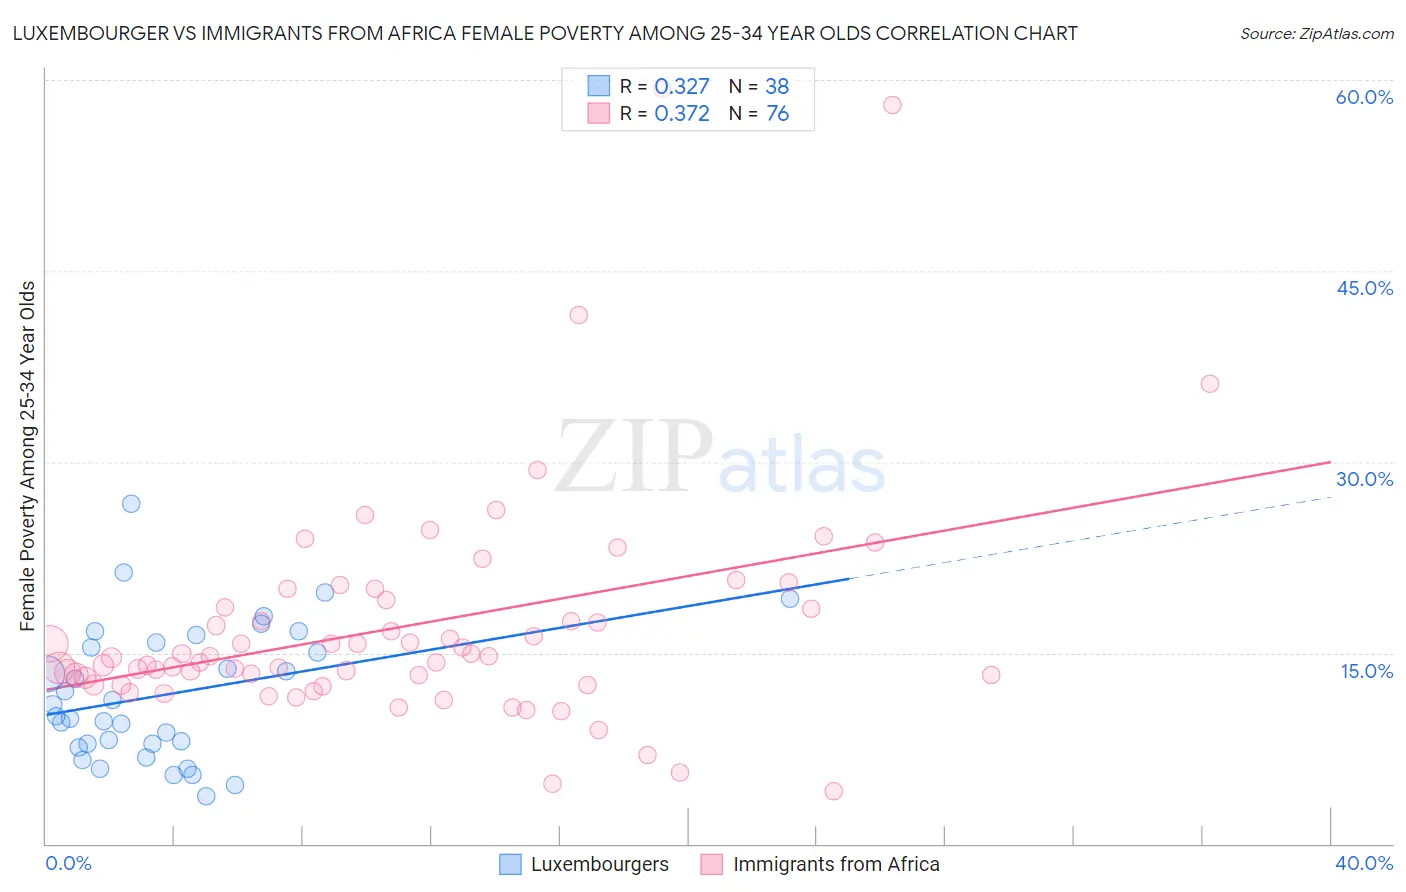 Luxembourger vs Immigrants from Africa Female Poverty Among 25-34 Year Olds